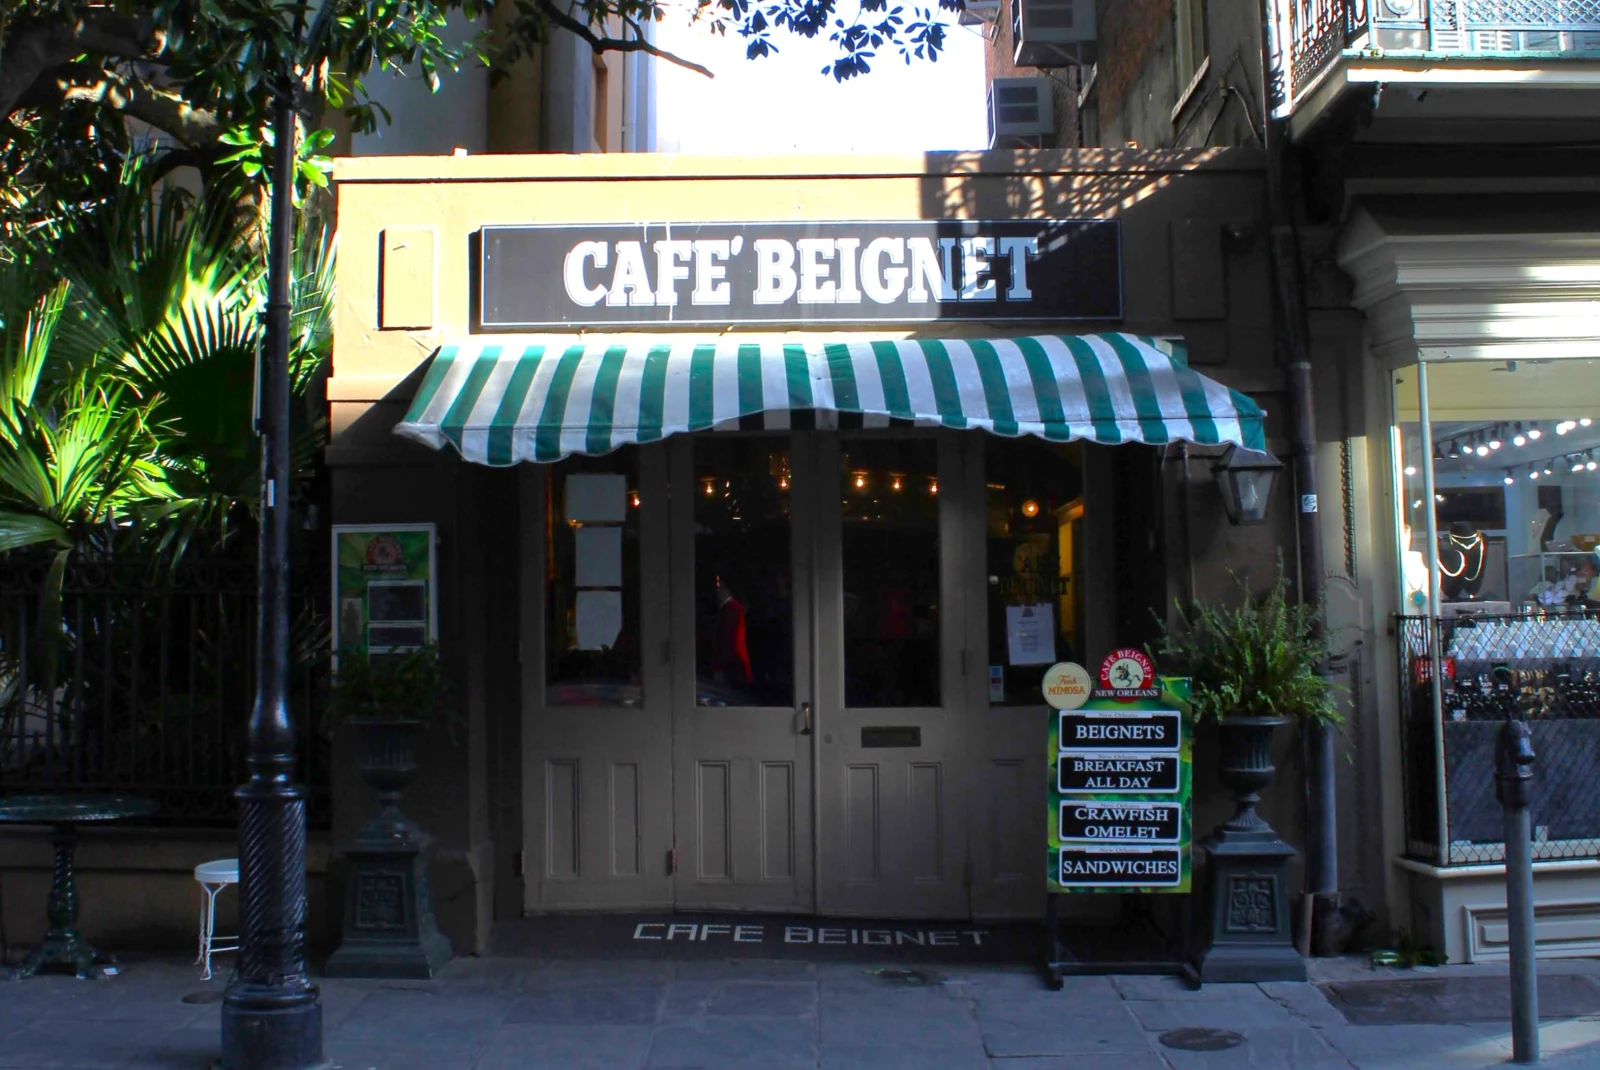 Exterior of a cafe saying CAFE BEIGNET